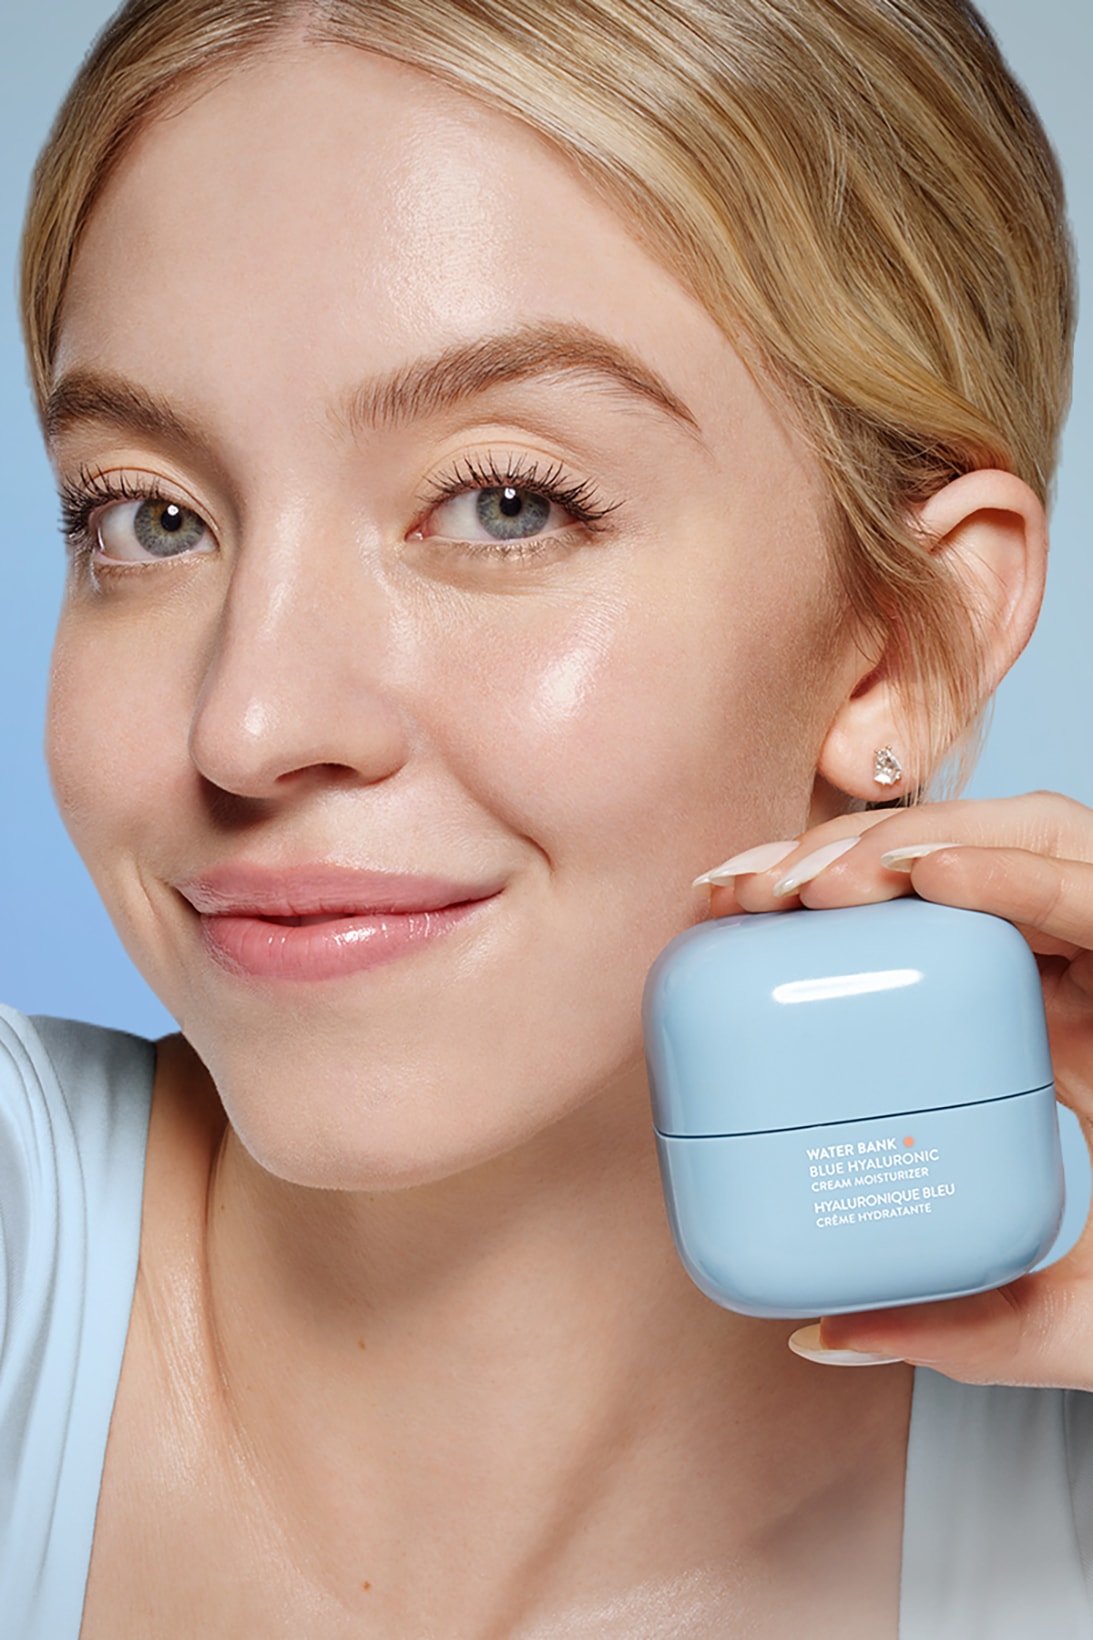 Sydney Sweeney Laneige Water Bank Collection Campaign Skincare